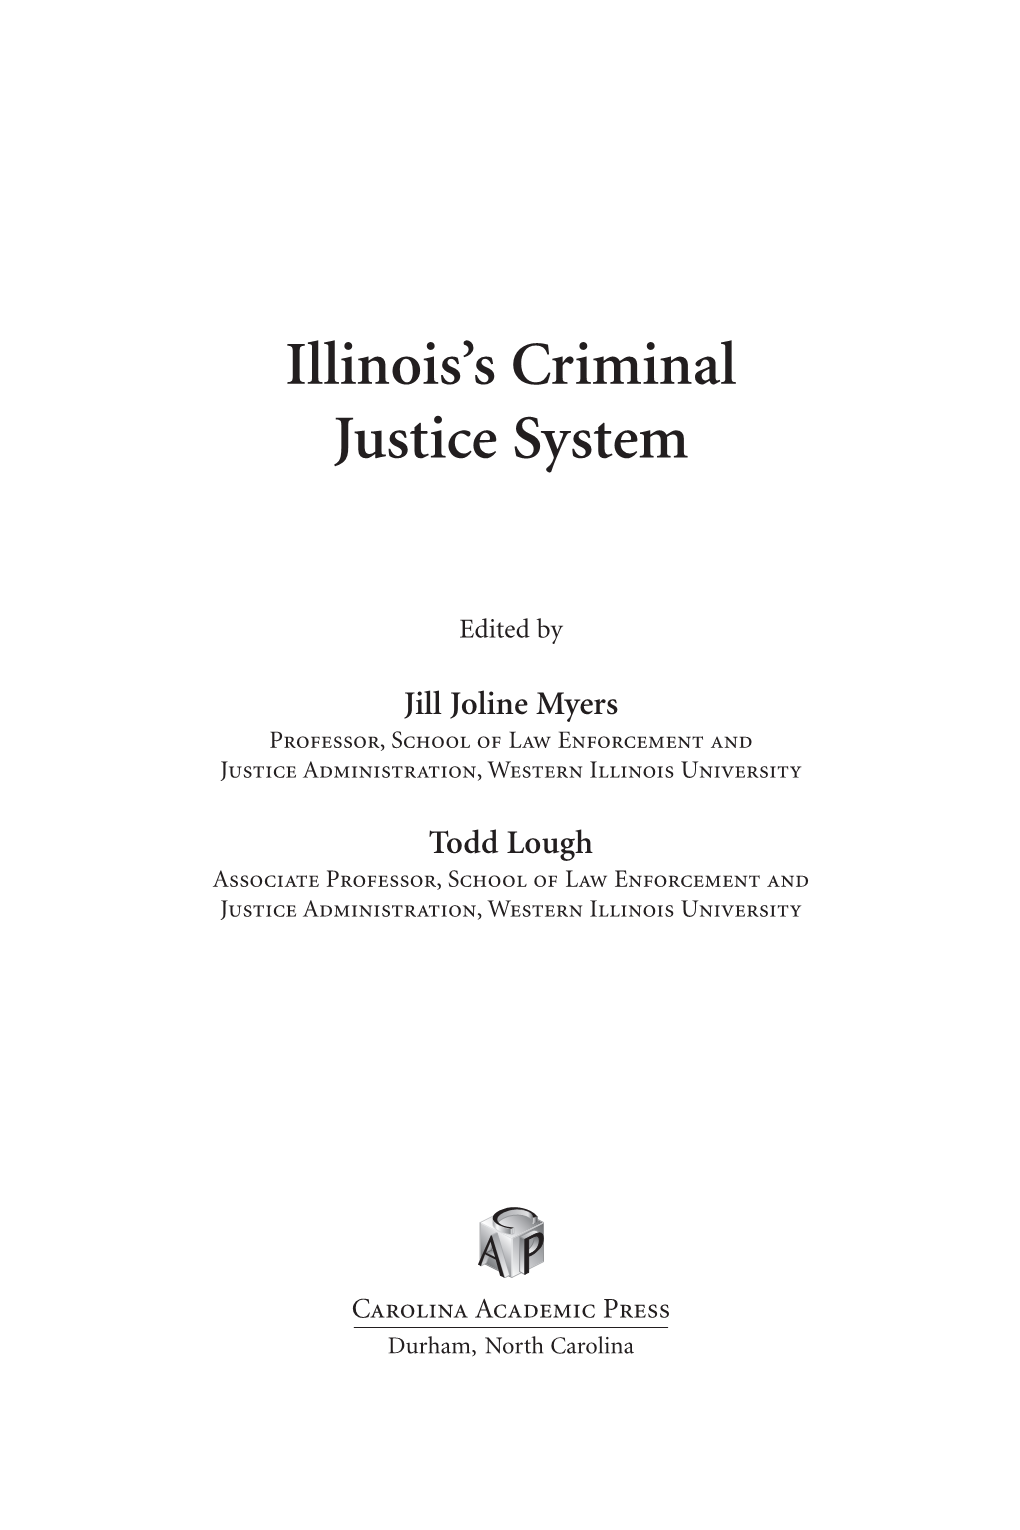 Illinois's Criminal Justice System / Edited by Jill Joline Myers and Todd Lough